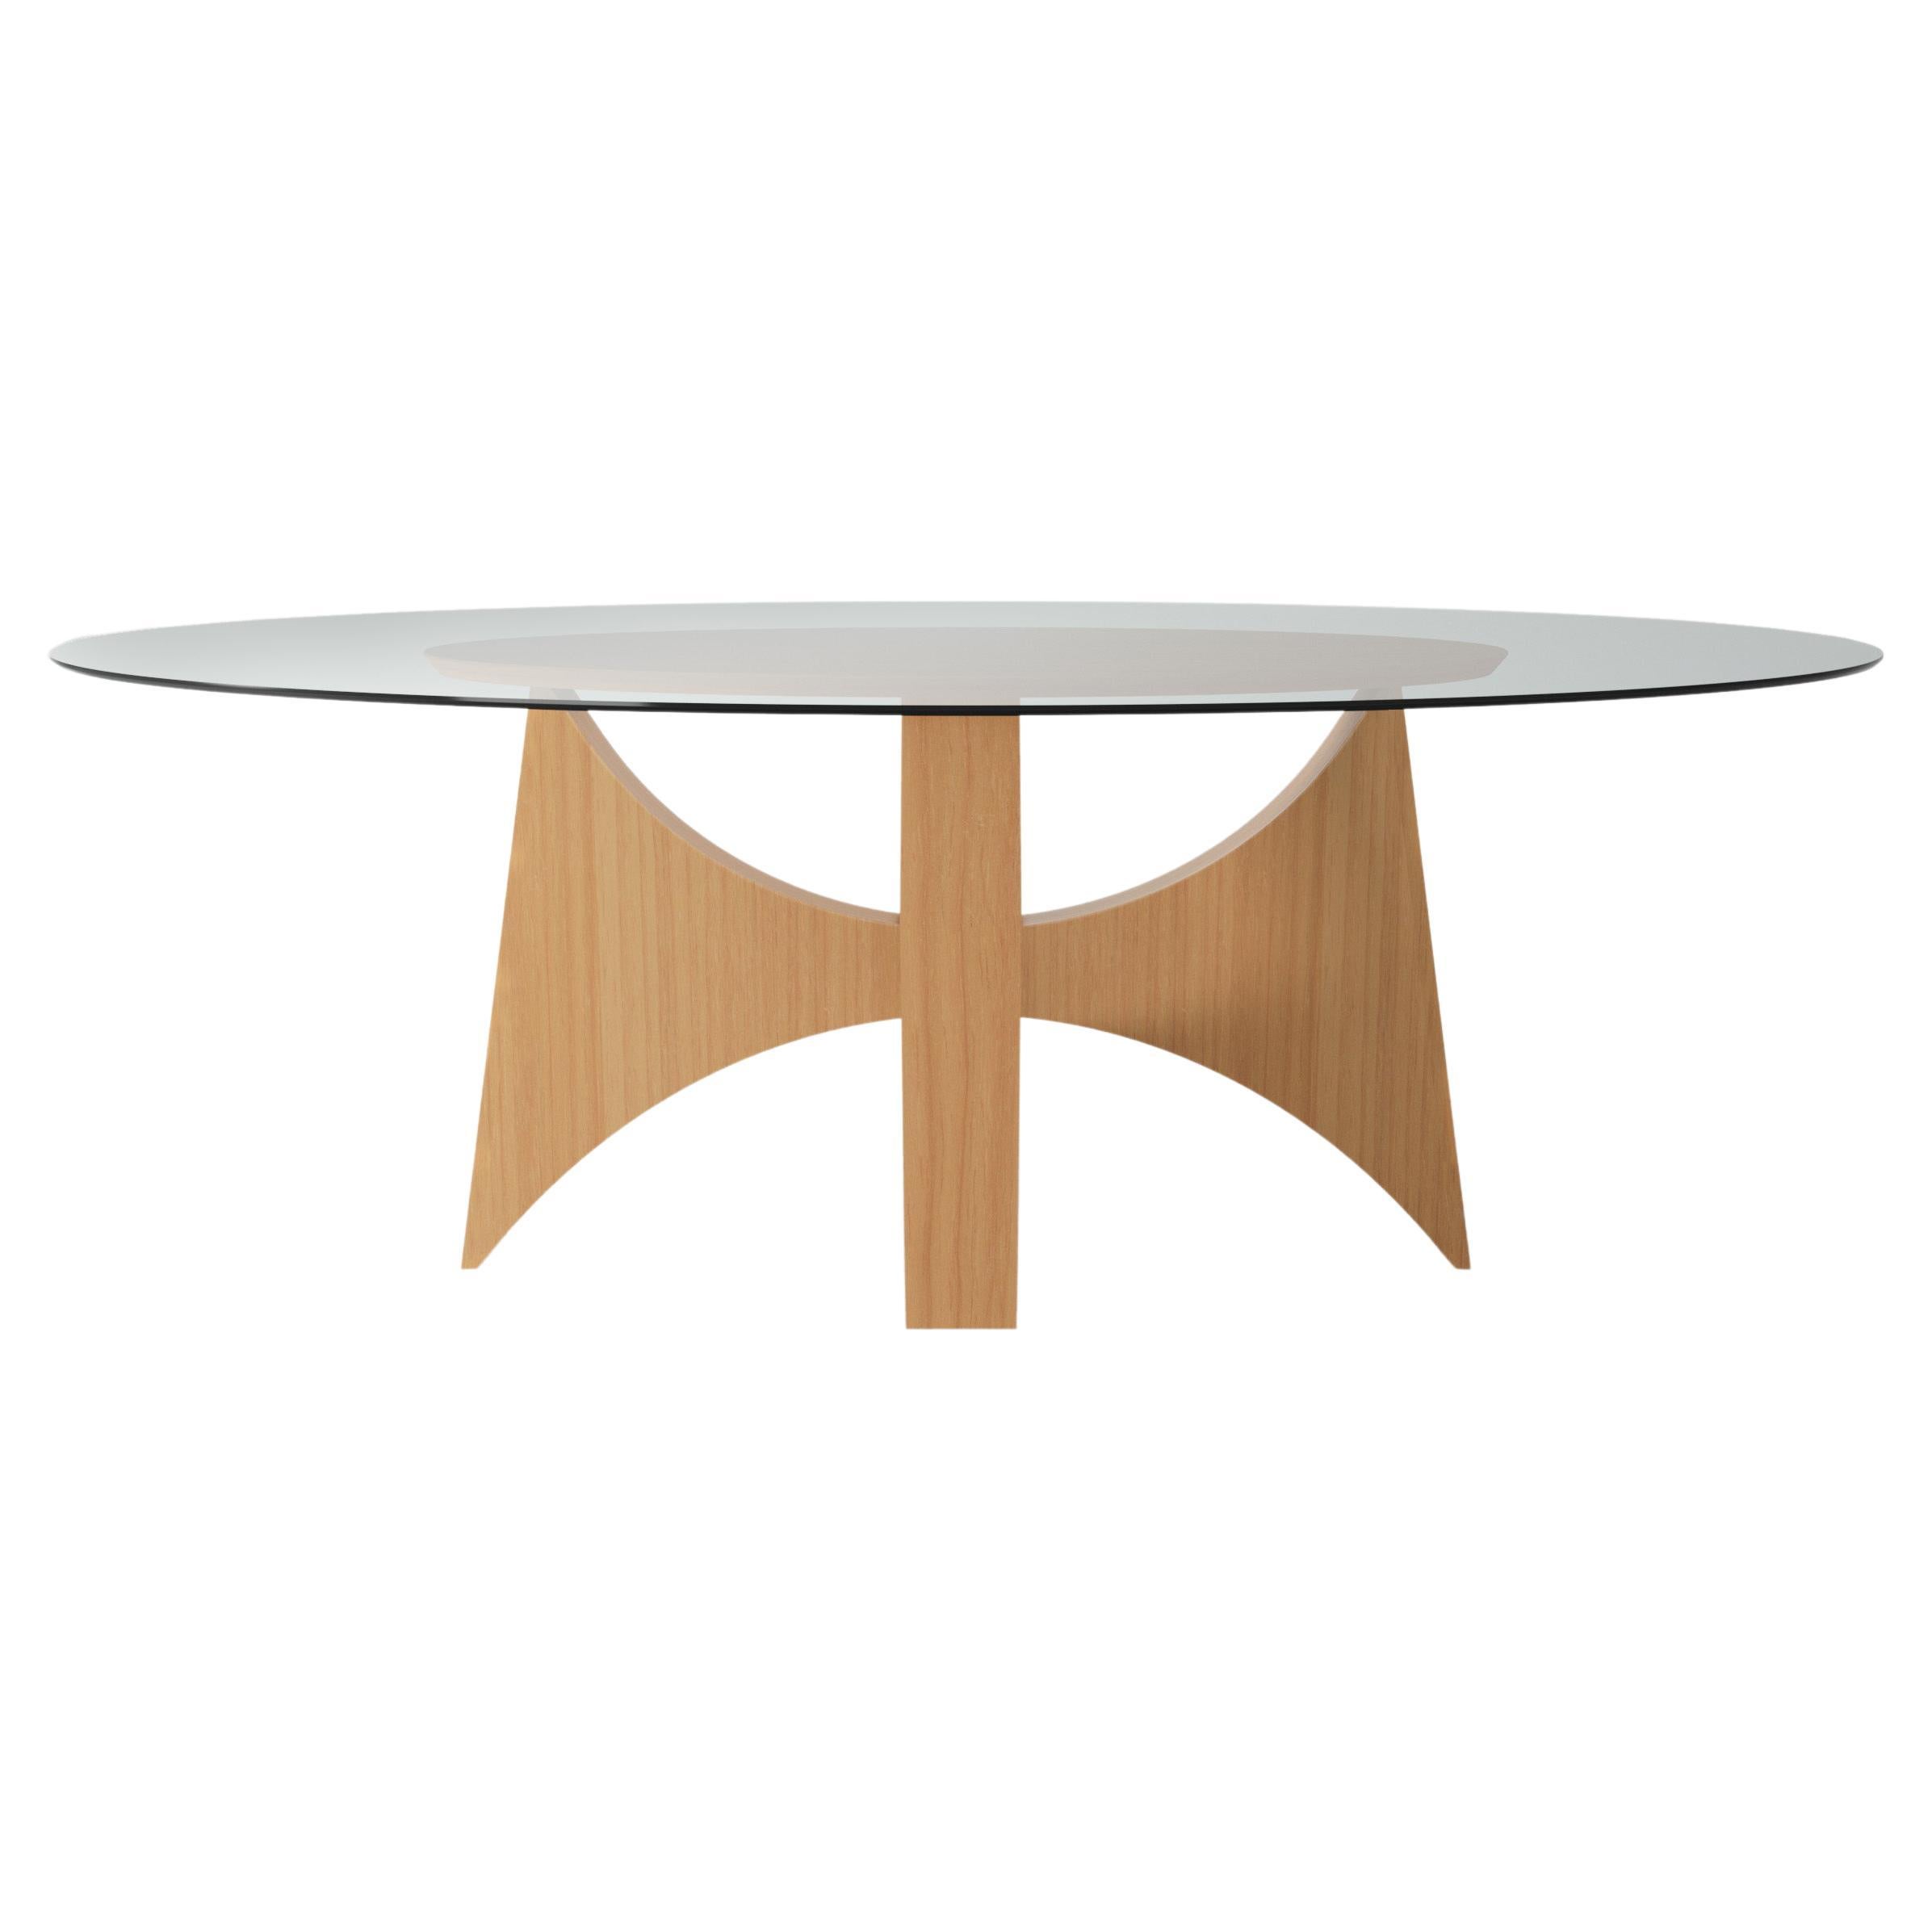 Planalto Dining Table base For Sale